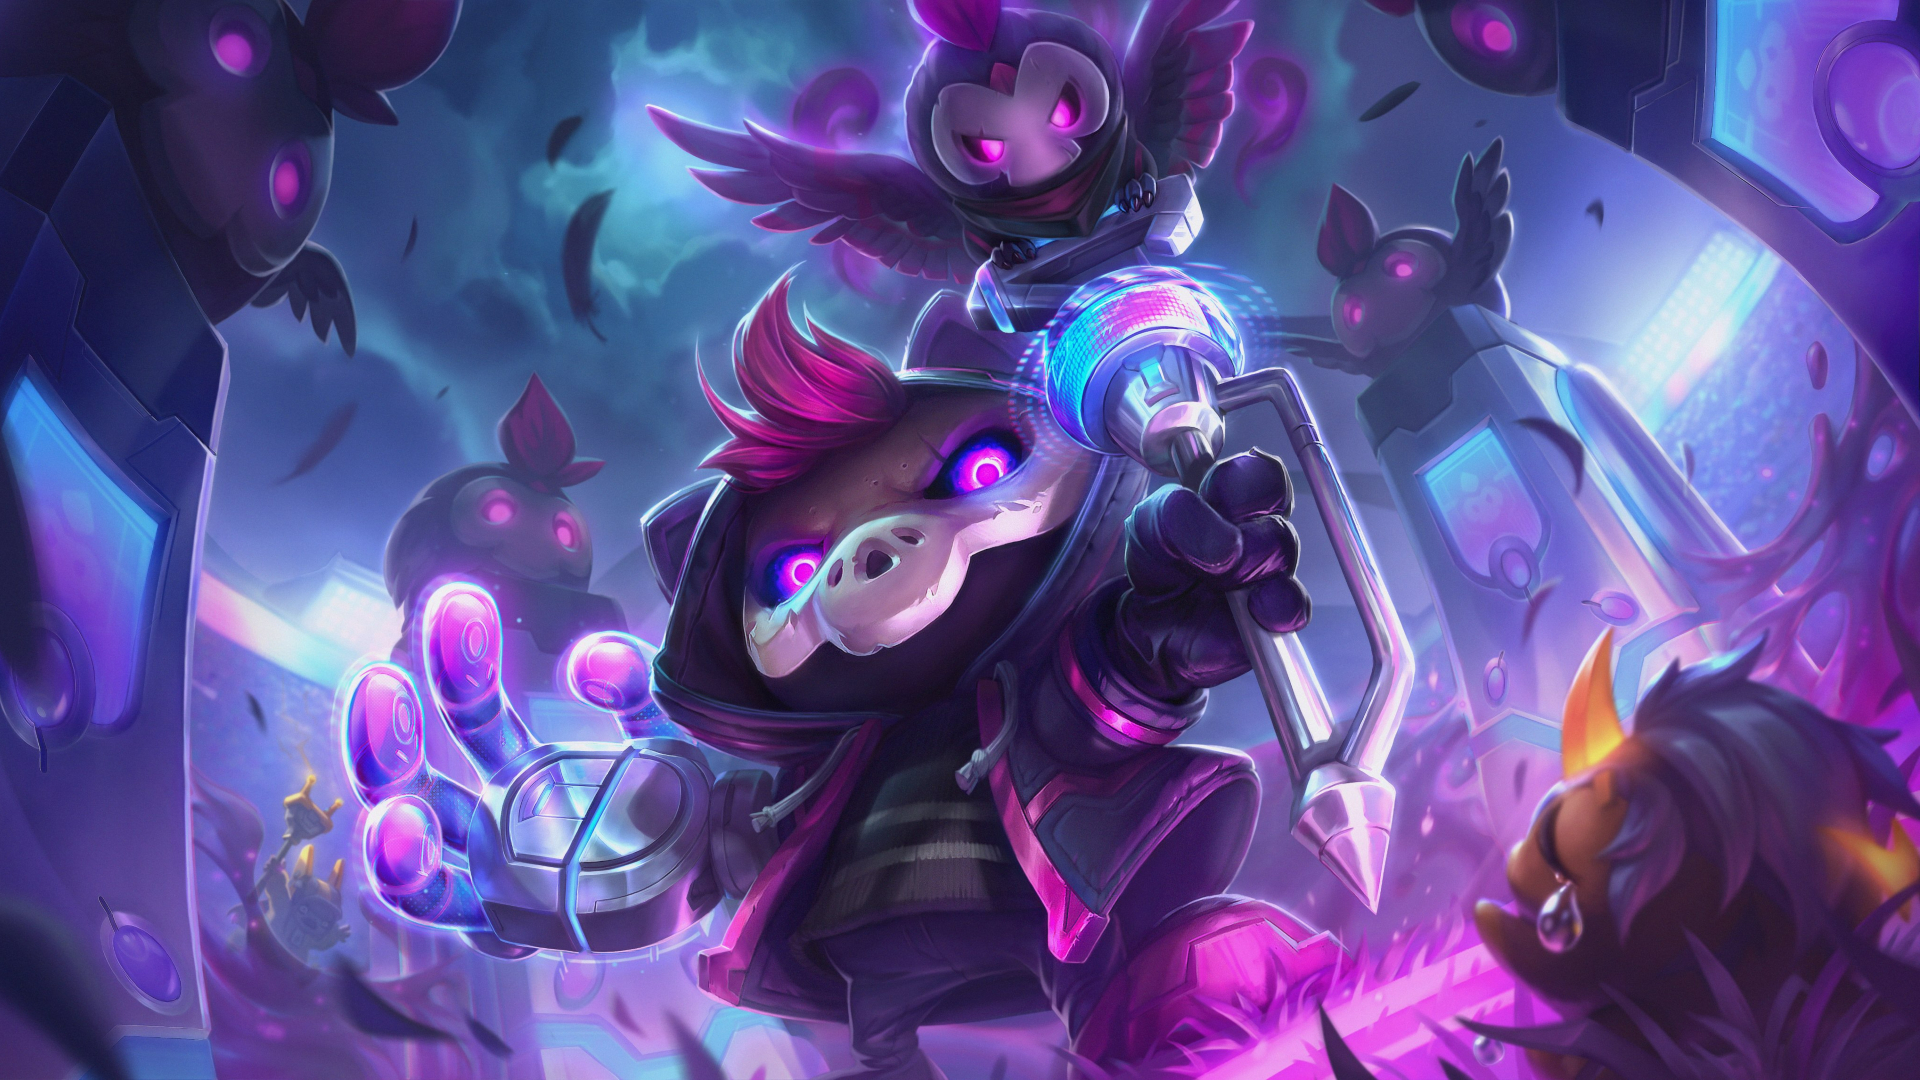 League of Legends Monster Tamer skins aren't as expected